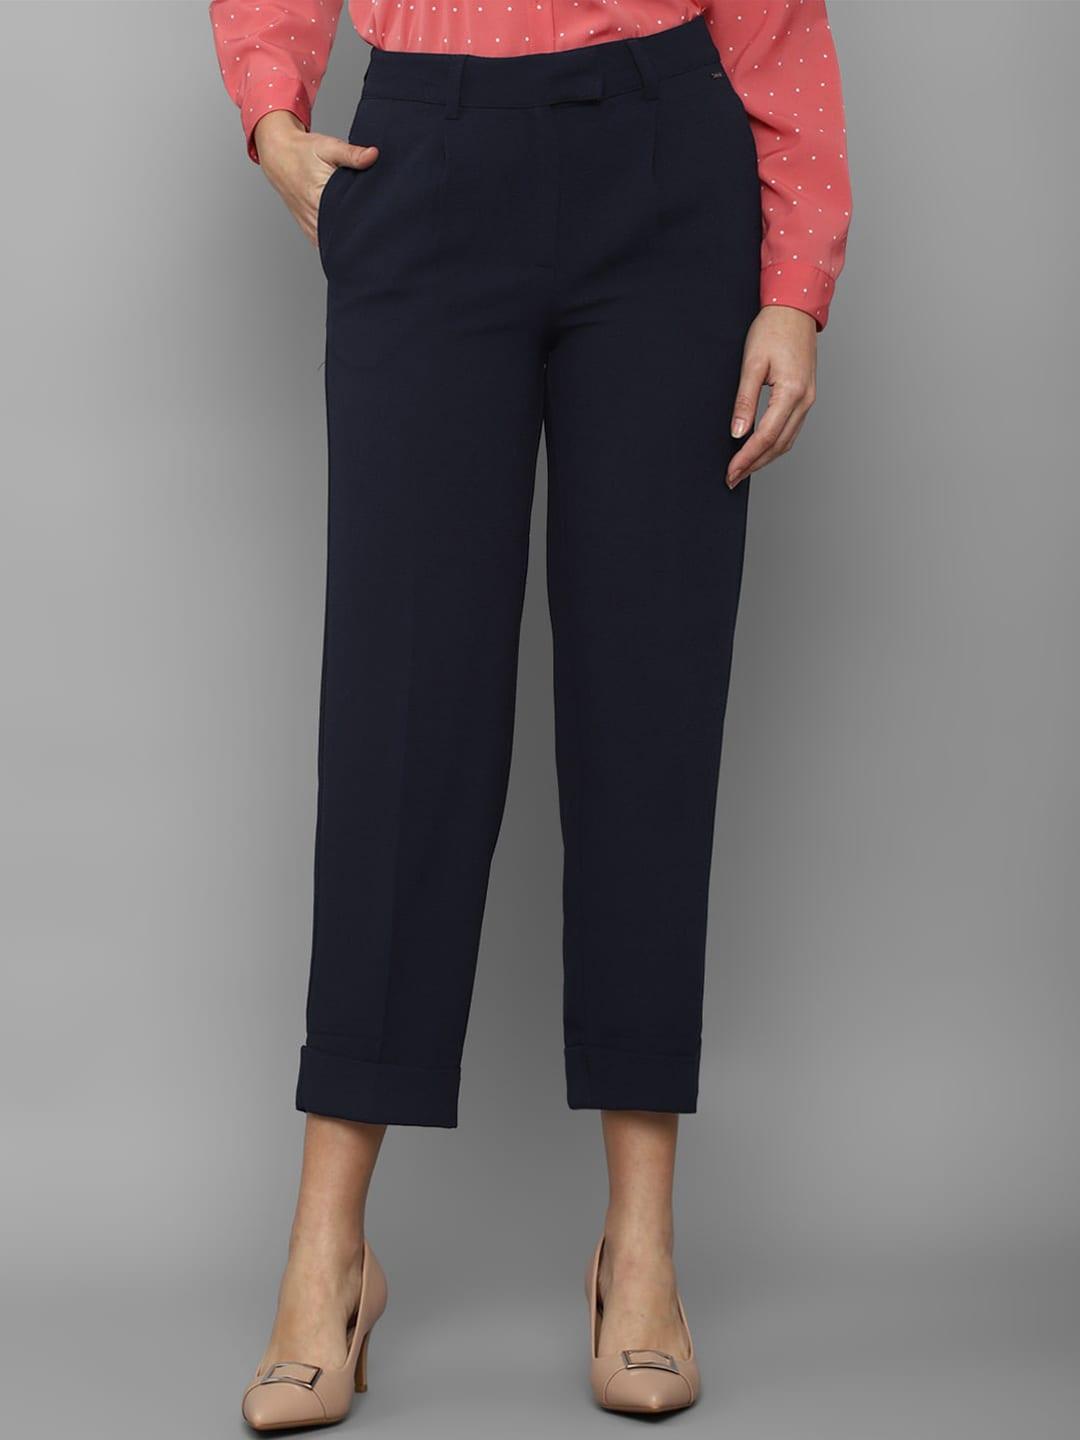 Allen Solly Woman Navy Blue Pleated Trousers